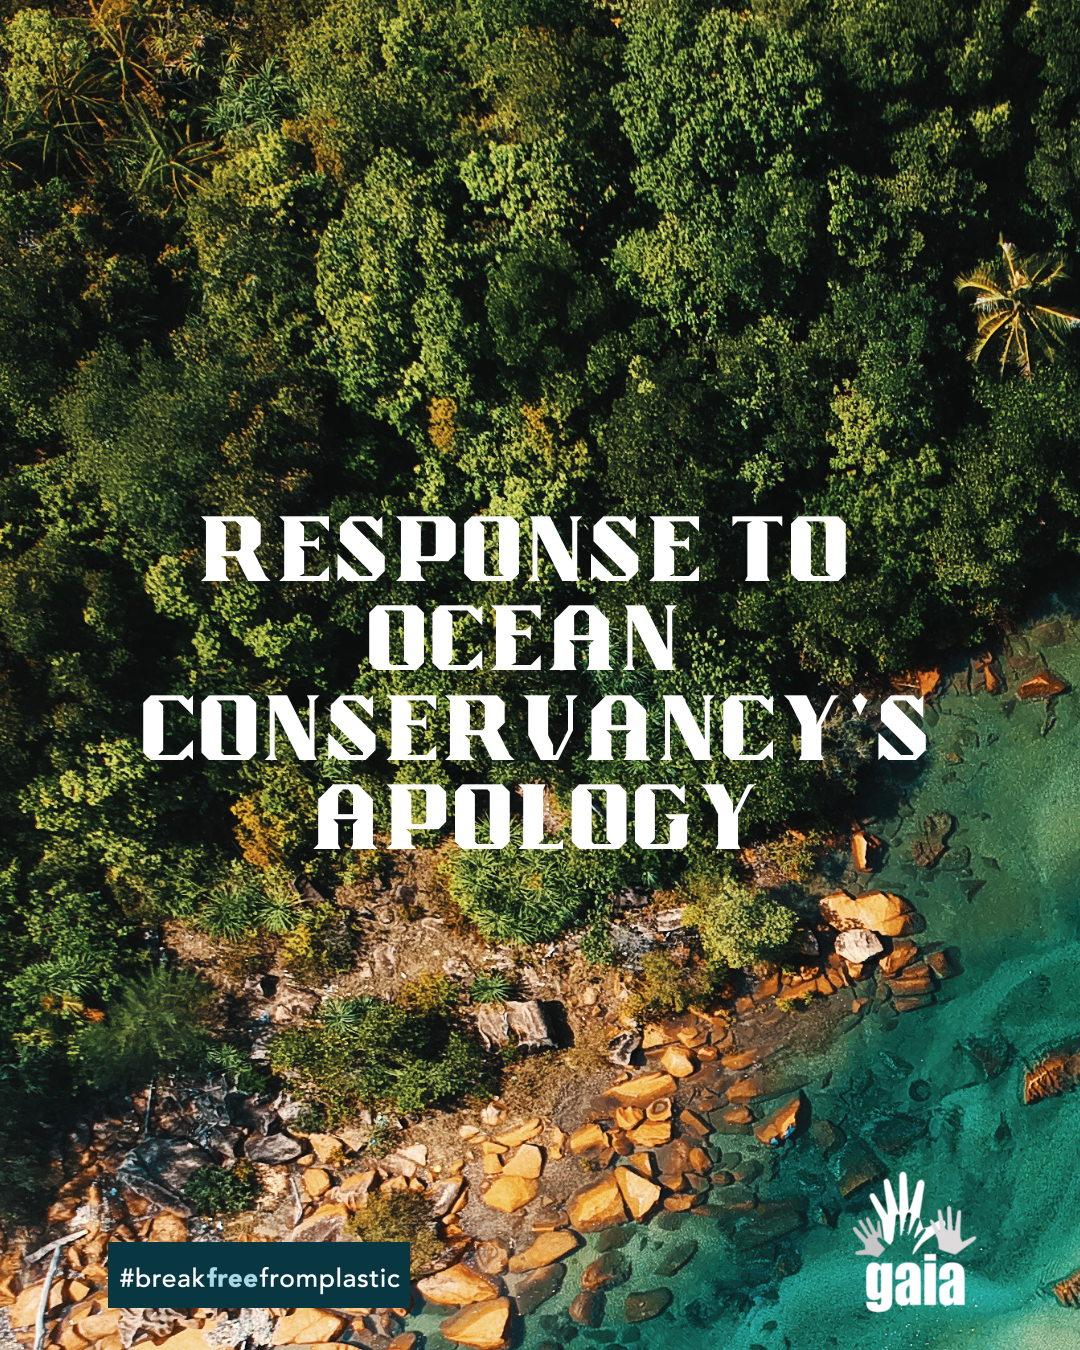 An image of a coastal forest with text over it that reads, “Response to Ocean Conservancy's Apology.“ GAIA and #breakfreefromplastic logos appear on the bottom of the image.